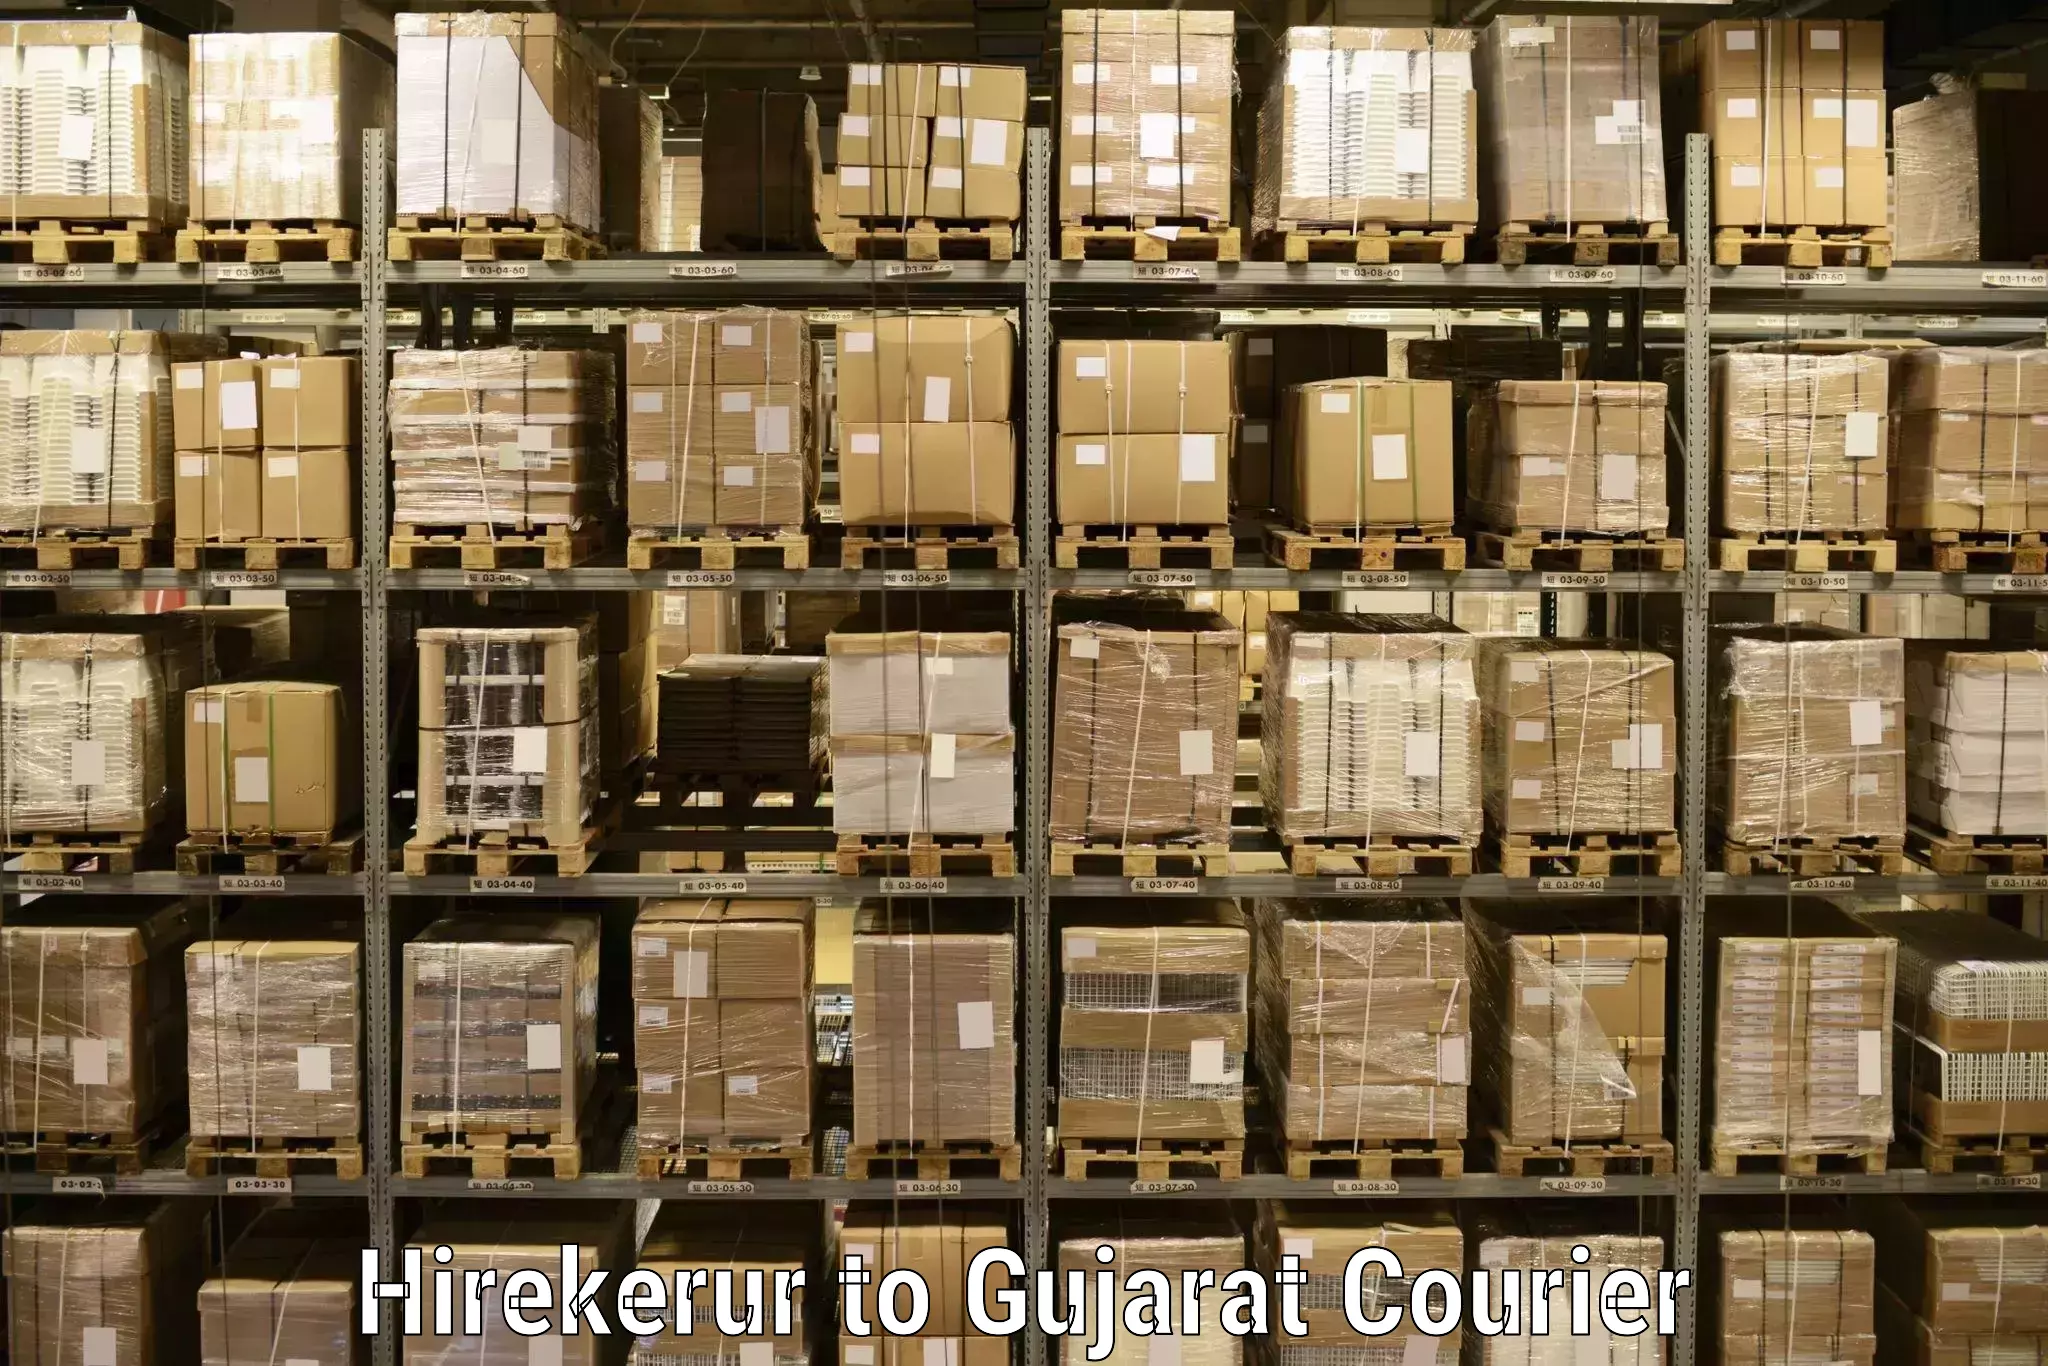 Global shipping networks Hirekerur to Surat